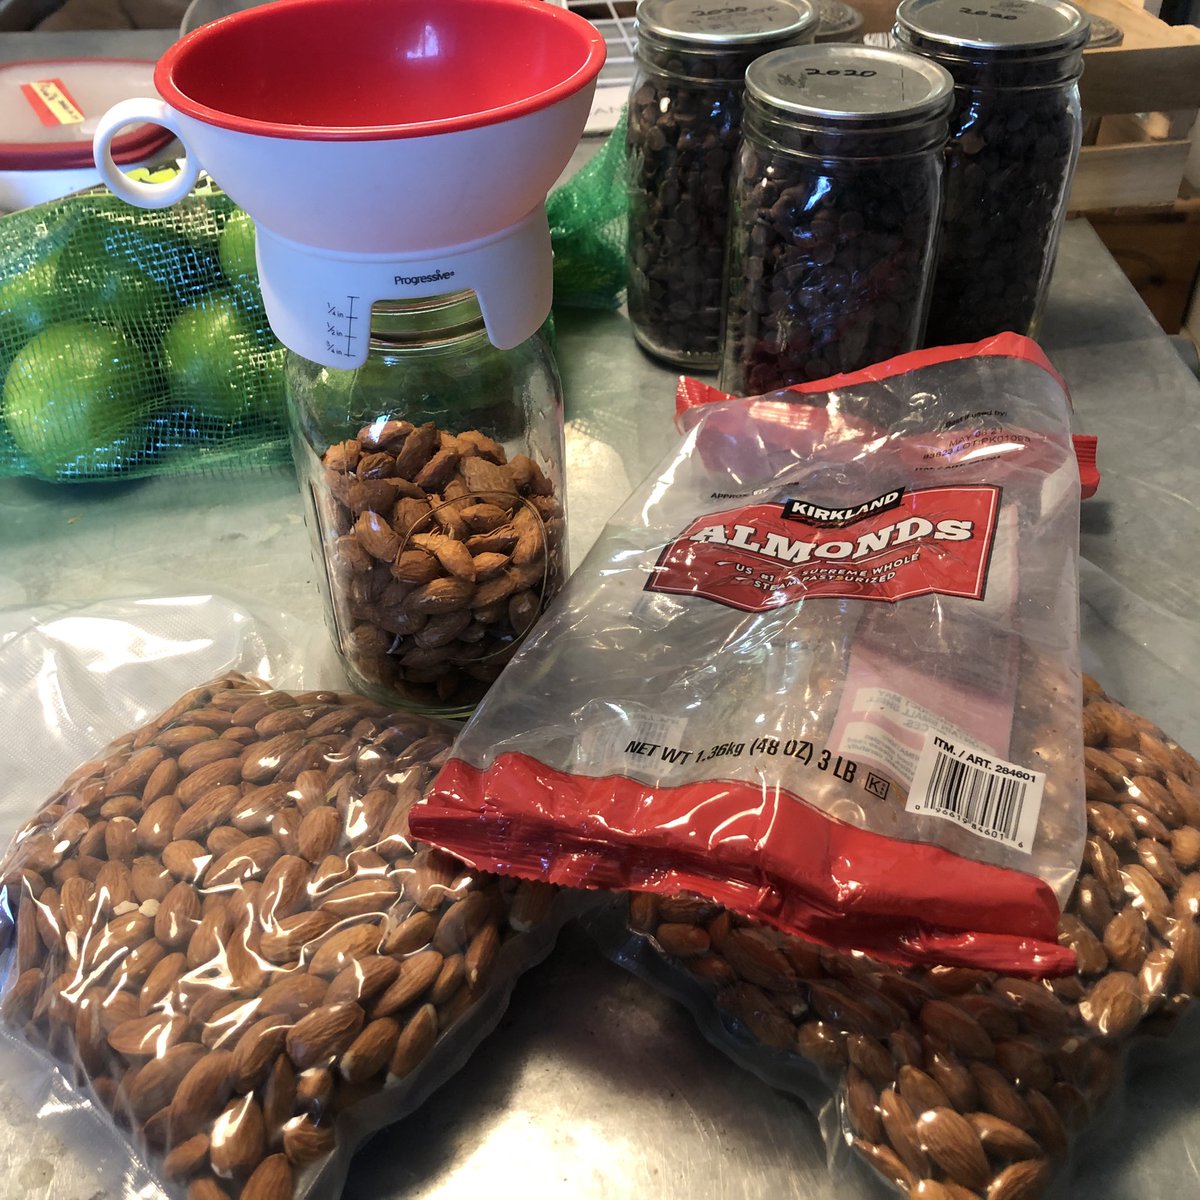 3 lbs almonds = 2.5 quartsThese bags will go into a 5 gallon pail with a gamma seal to protect from mice